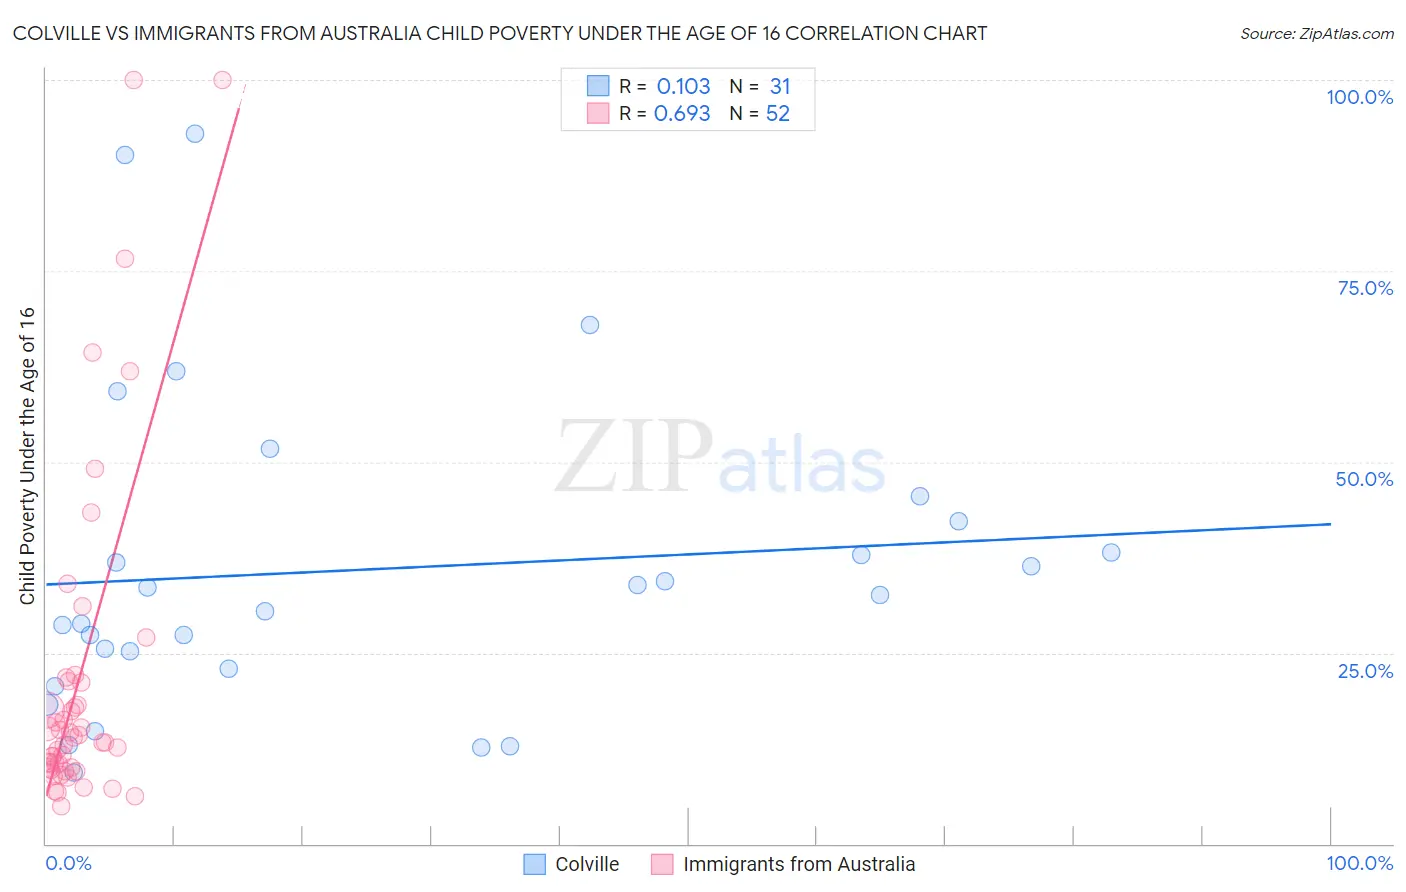 Colville vs Immigrants from Australia Child Poverty Under the Age of 16